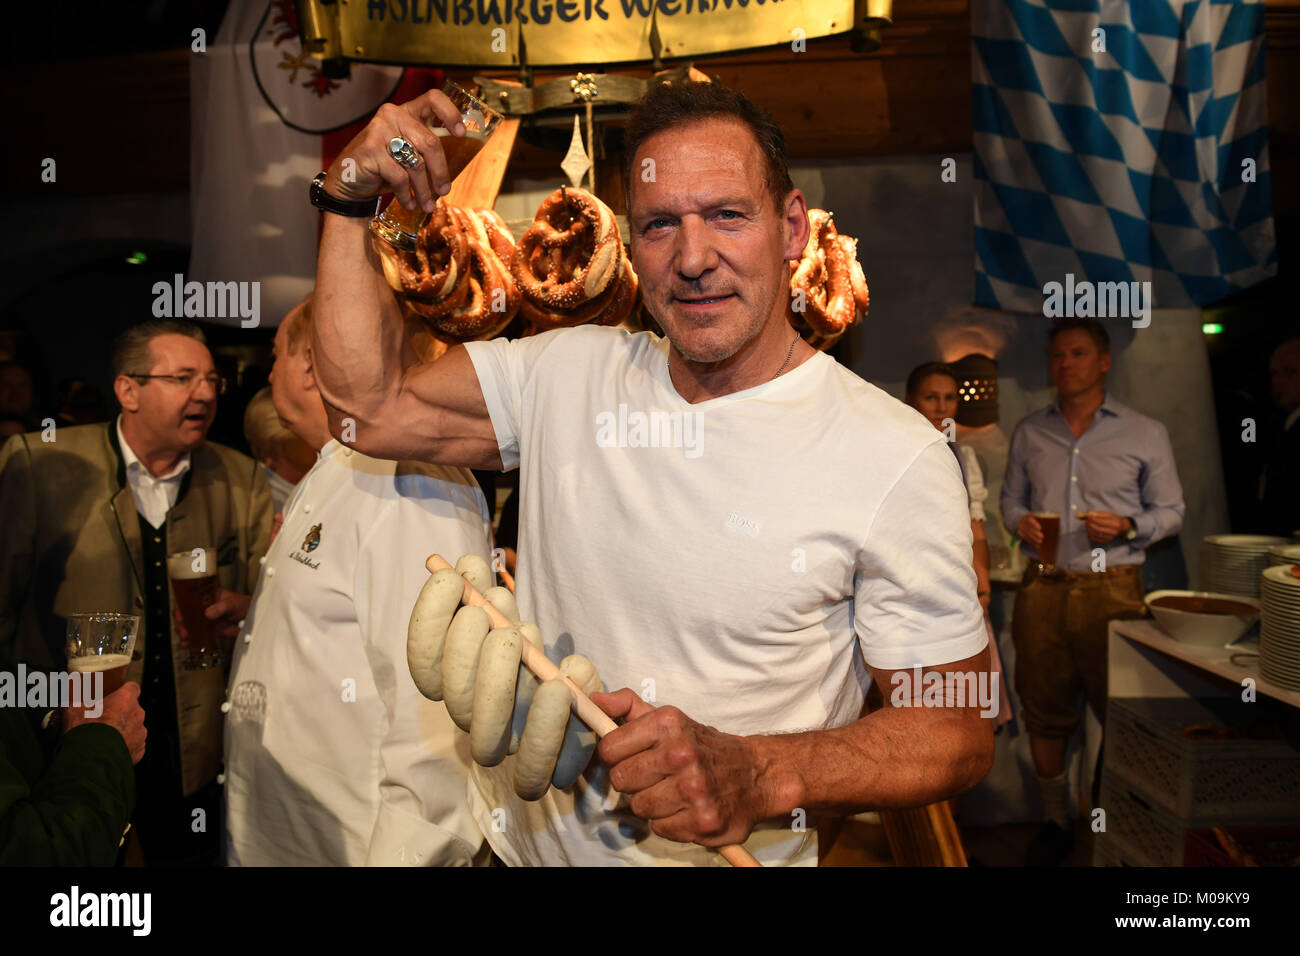 Actor Ralf Moeller  attends the 27th traditional 'Weisswurst party' (lit. Bavarian white sausage party) at the Stanglwirt Inn in Going, Germany, 19 January 2018. The 'Weisswurst party' is an event where stars and celebrities meet a day before the legendary Hahnenkamm downhill race. Photo: Felix Hörhager/dpa Stock Photo